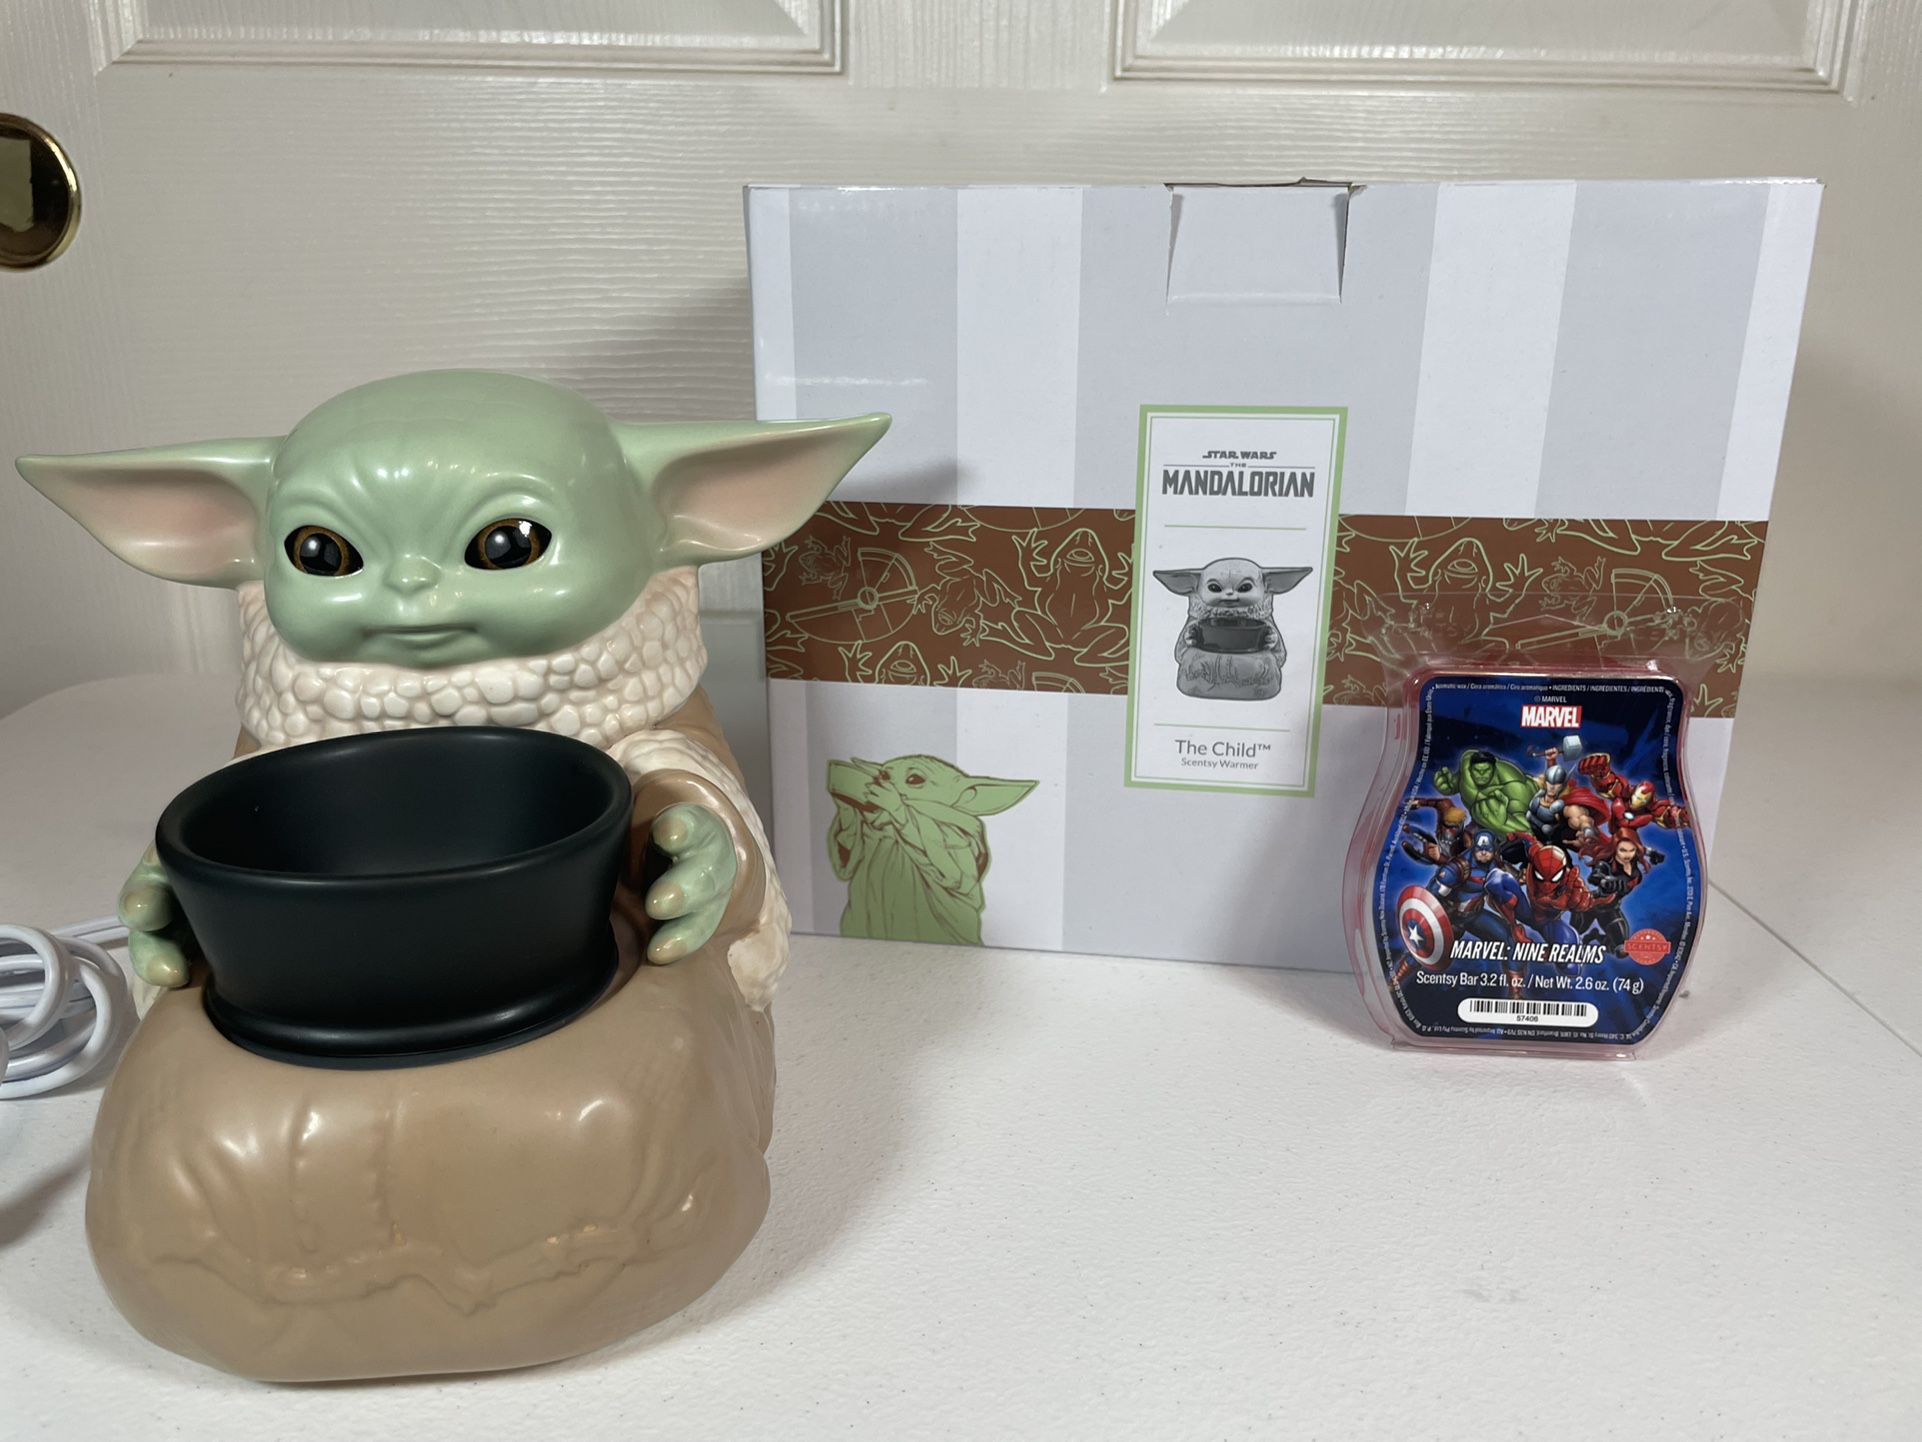 Scentsy “The Child” (Grogu) Wax Scent Warmer With Scentsy Bars